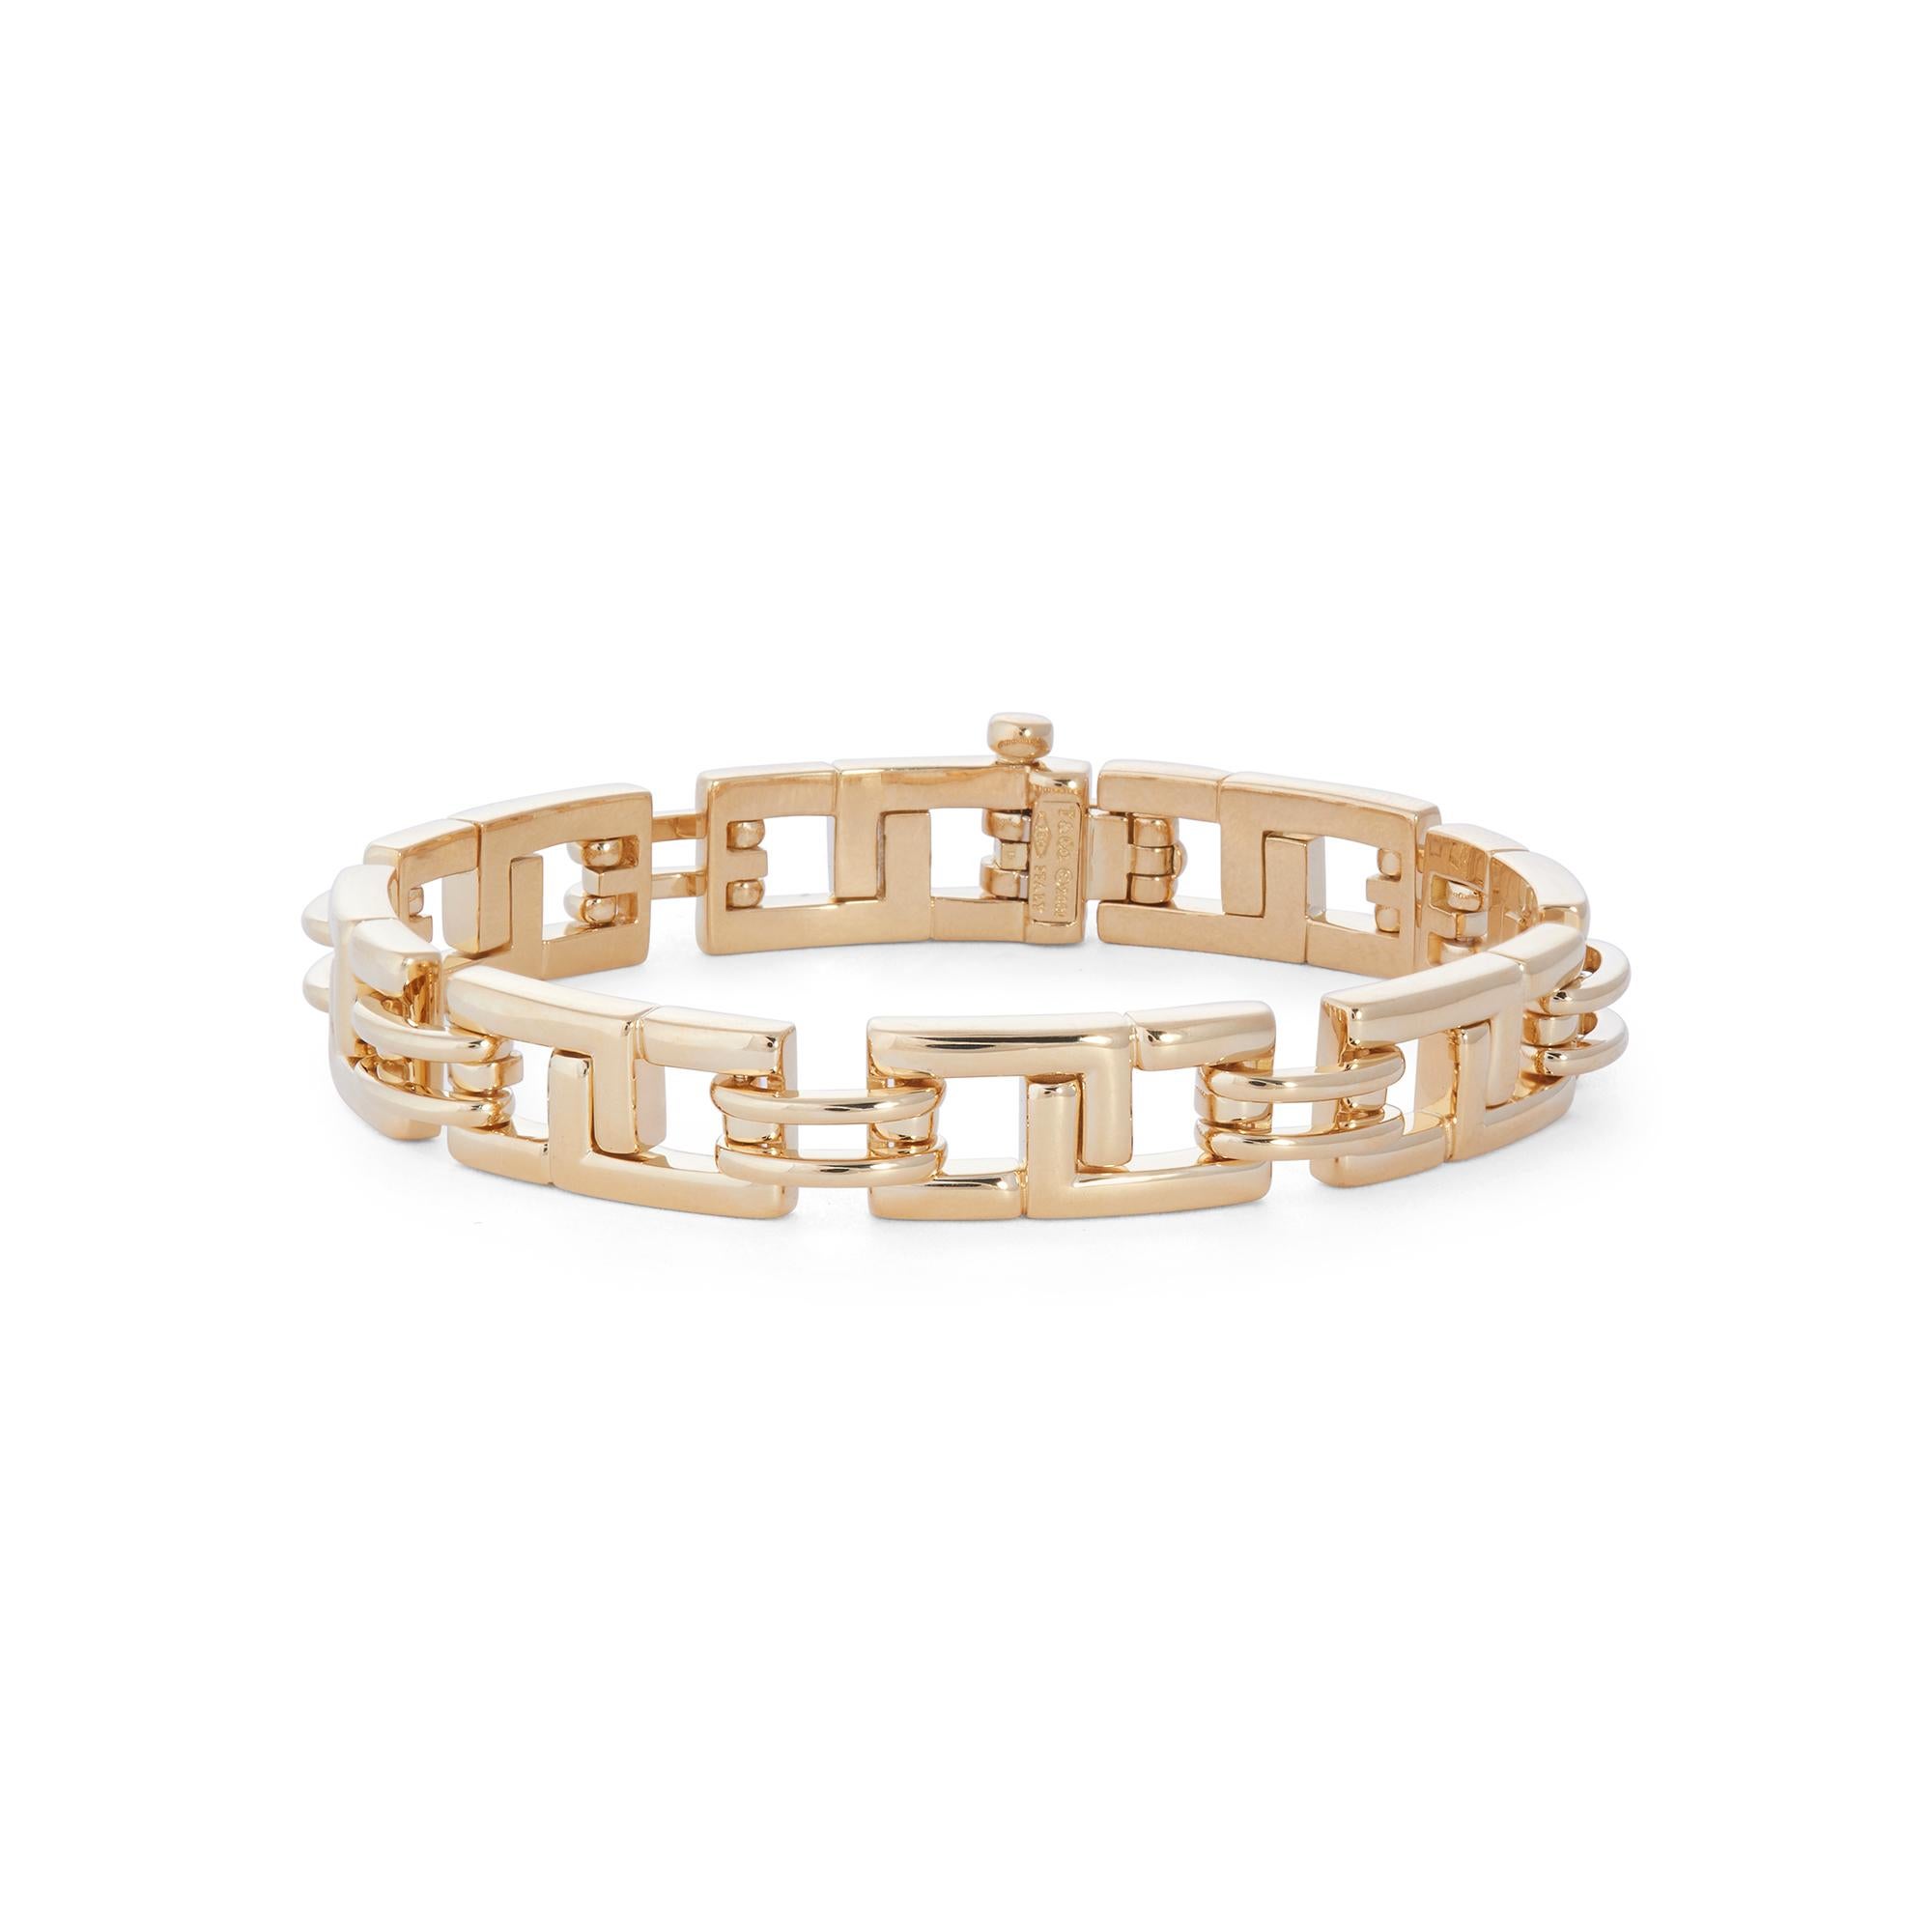 Authentic Tiffany & Co. Biscayne bracelet crafted in 18 karat yellow gold.  Comprised of geometric links of high polished gold measuring 7 1/4 inches in total length and .37 inches wide with a pin clasp.  Signed T & Co., 2001, 750, Italy.  Bracelet